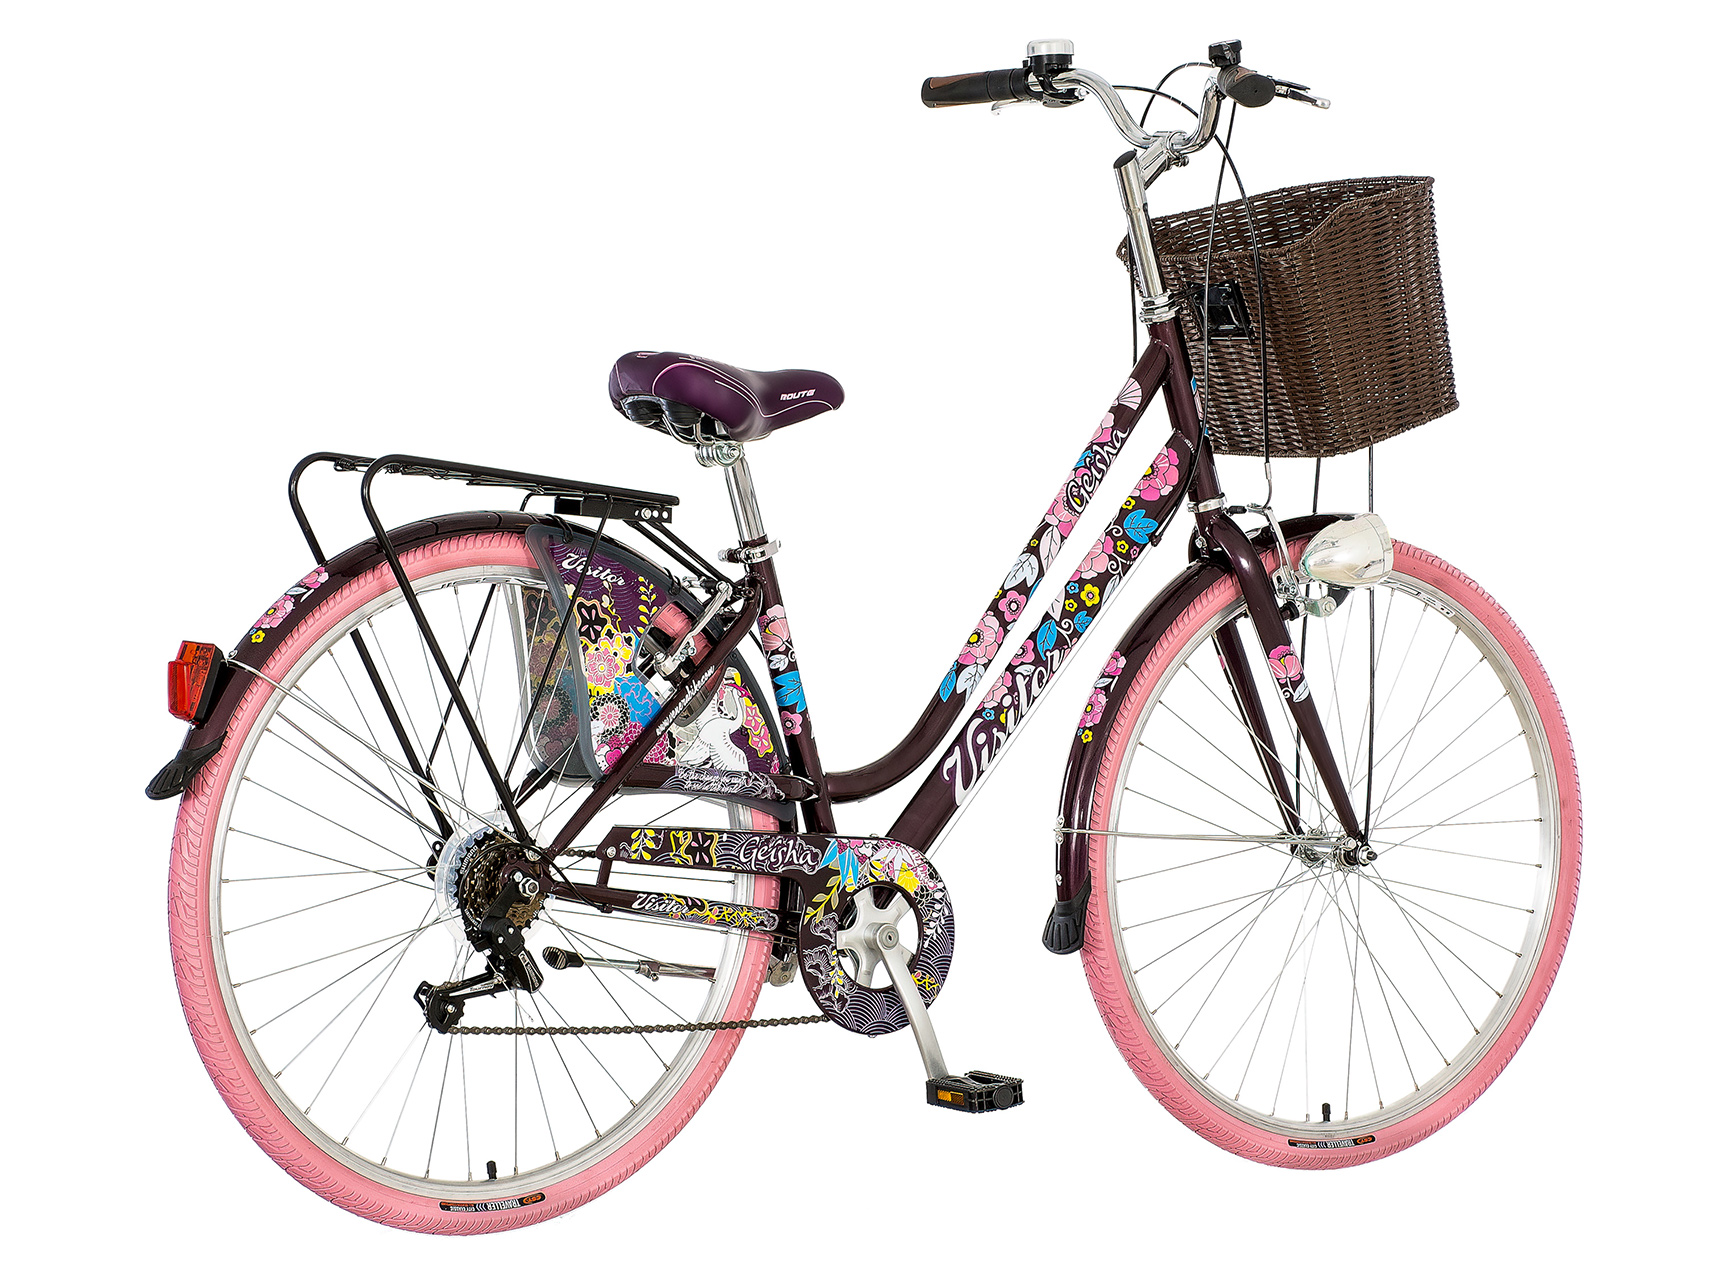 Fashion bicycle visitor purple pink-fas282s6